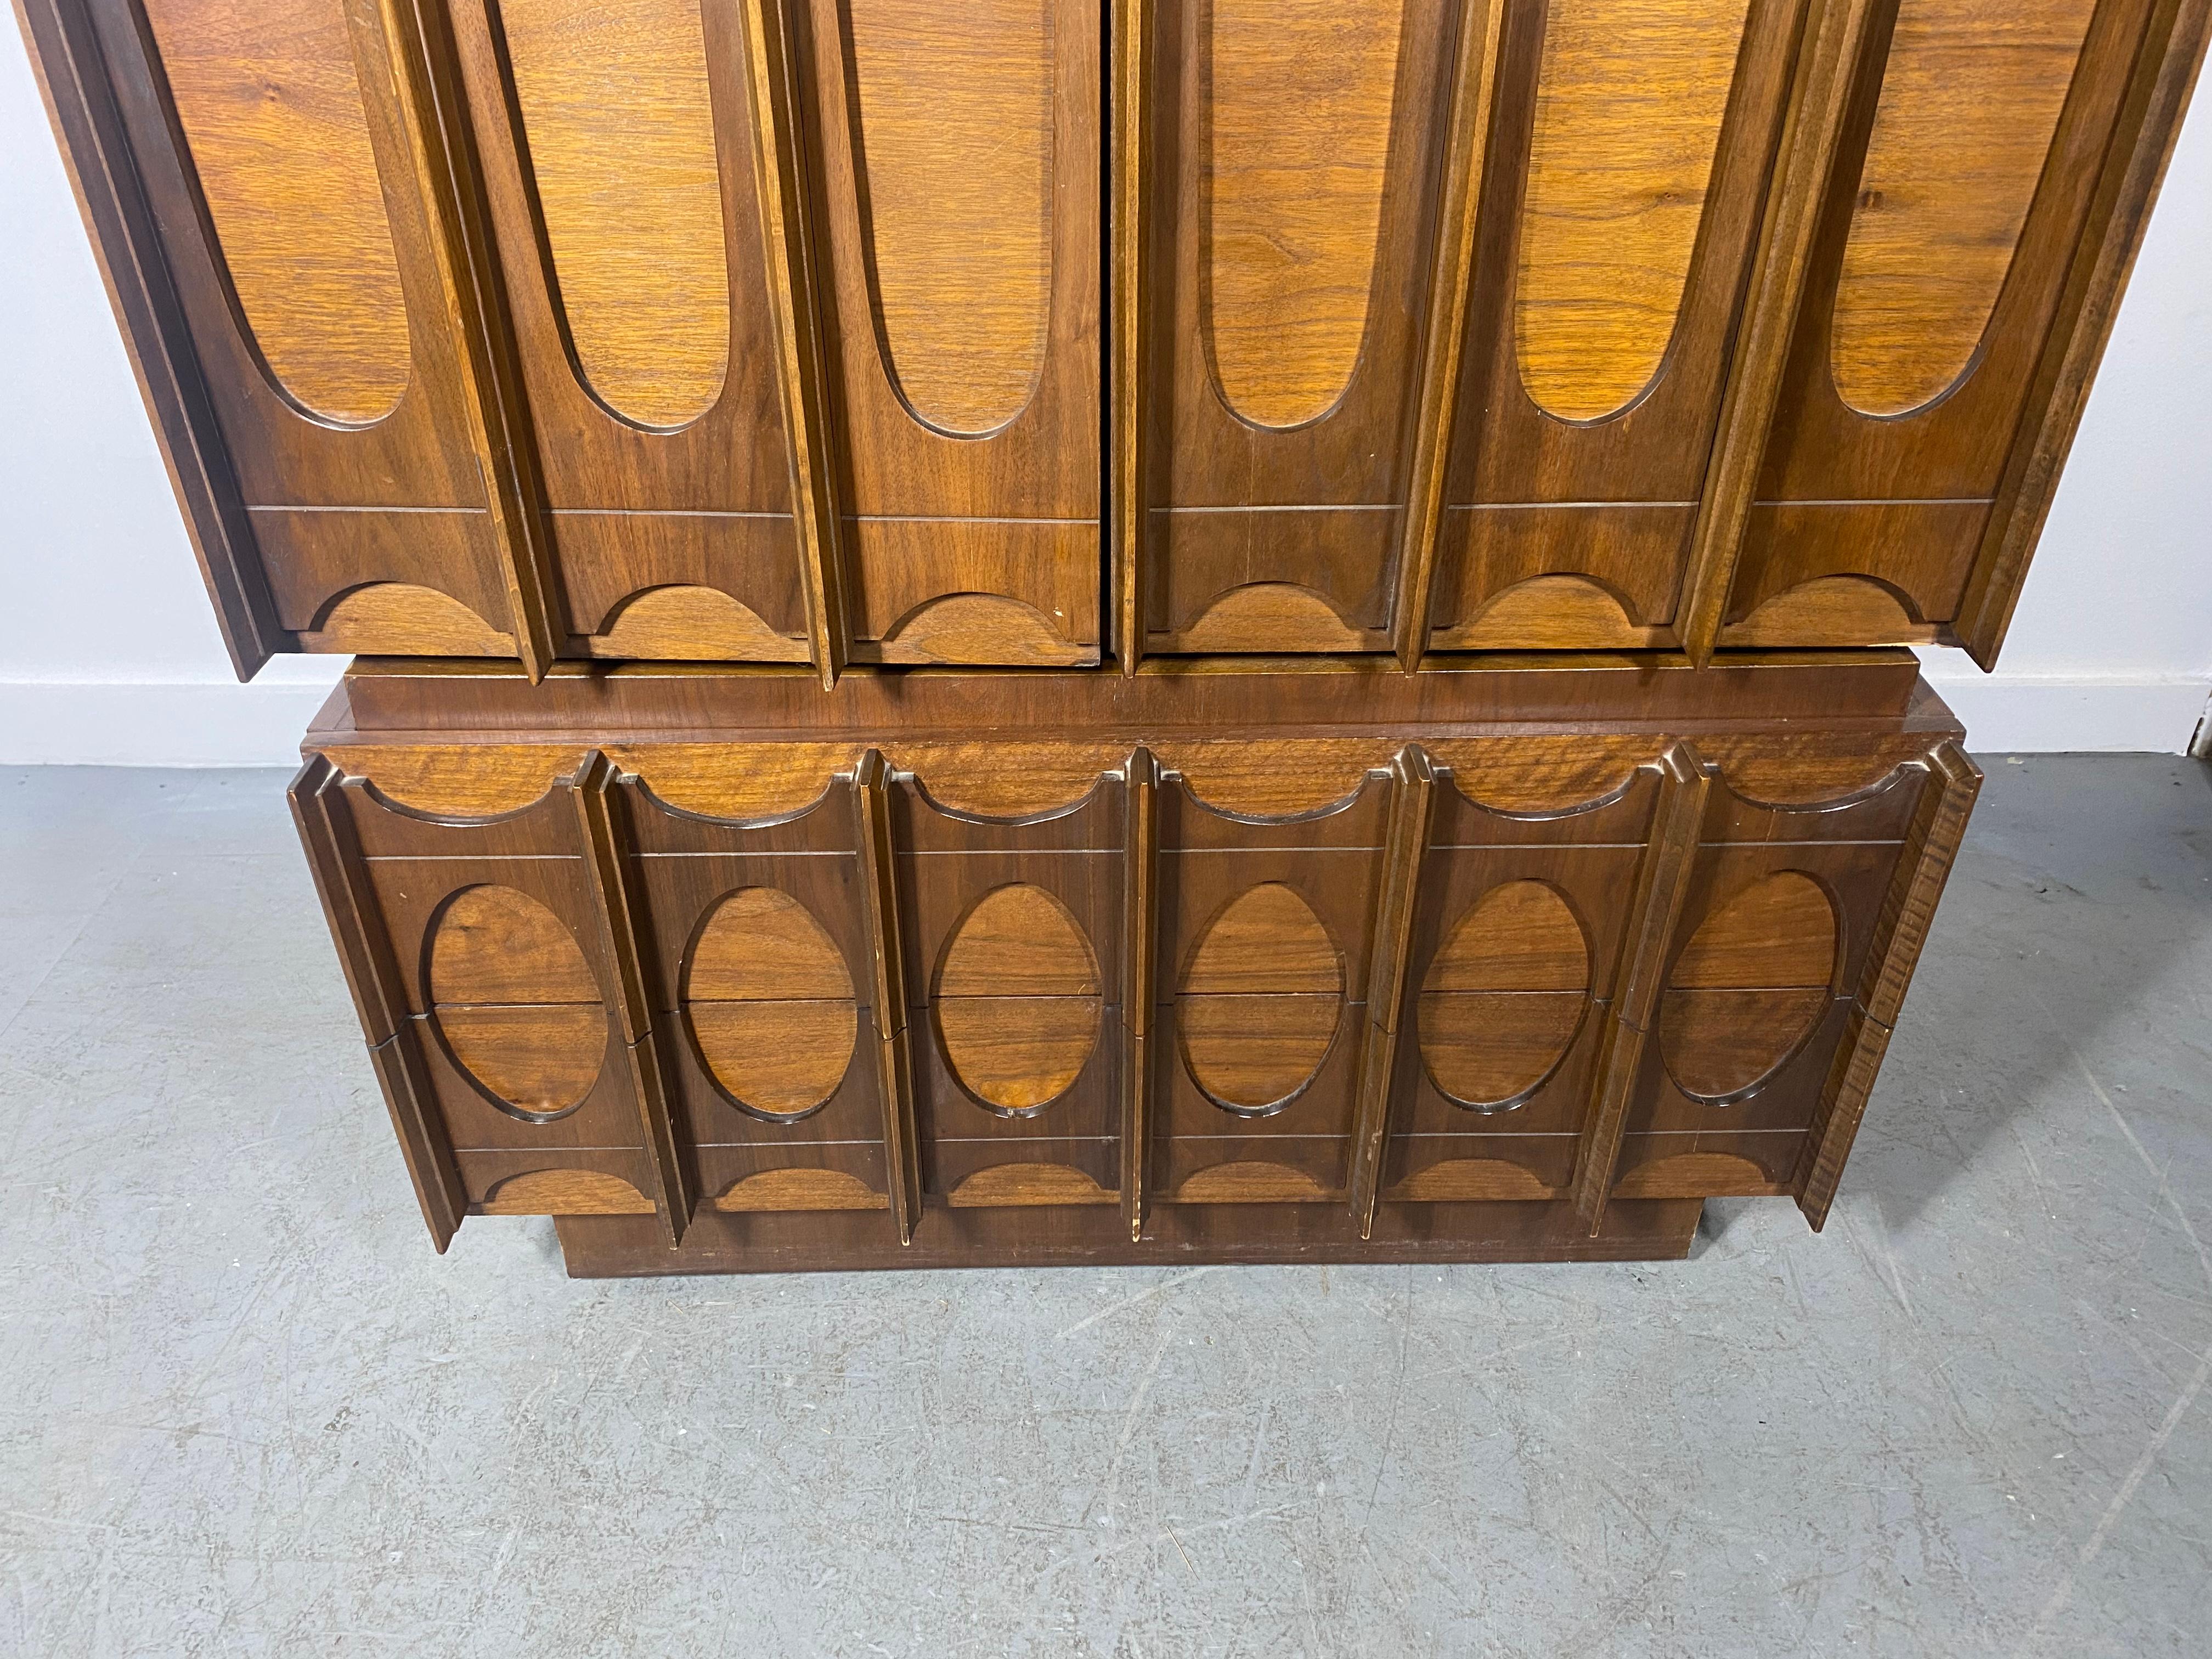 Tobago Brutalist Midcentury Walnut Armoire Highboy Dresser In Good Condition For Sale In Buffalo, NY